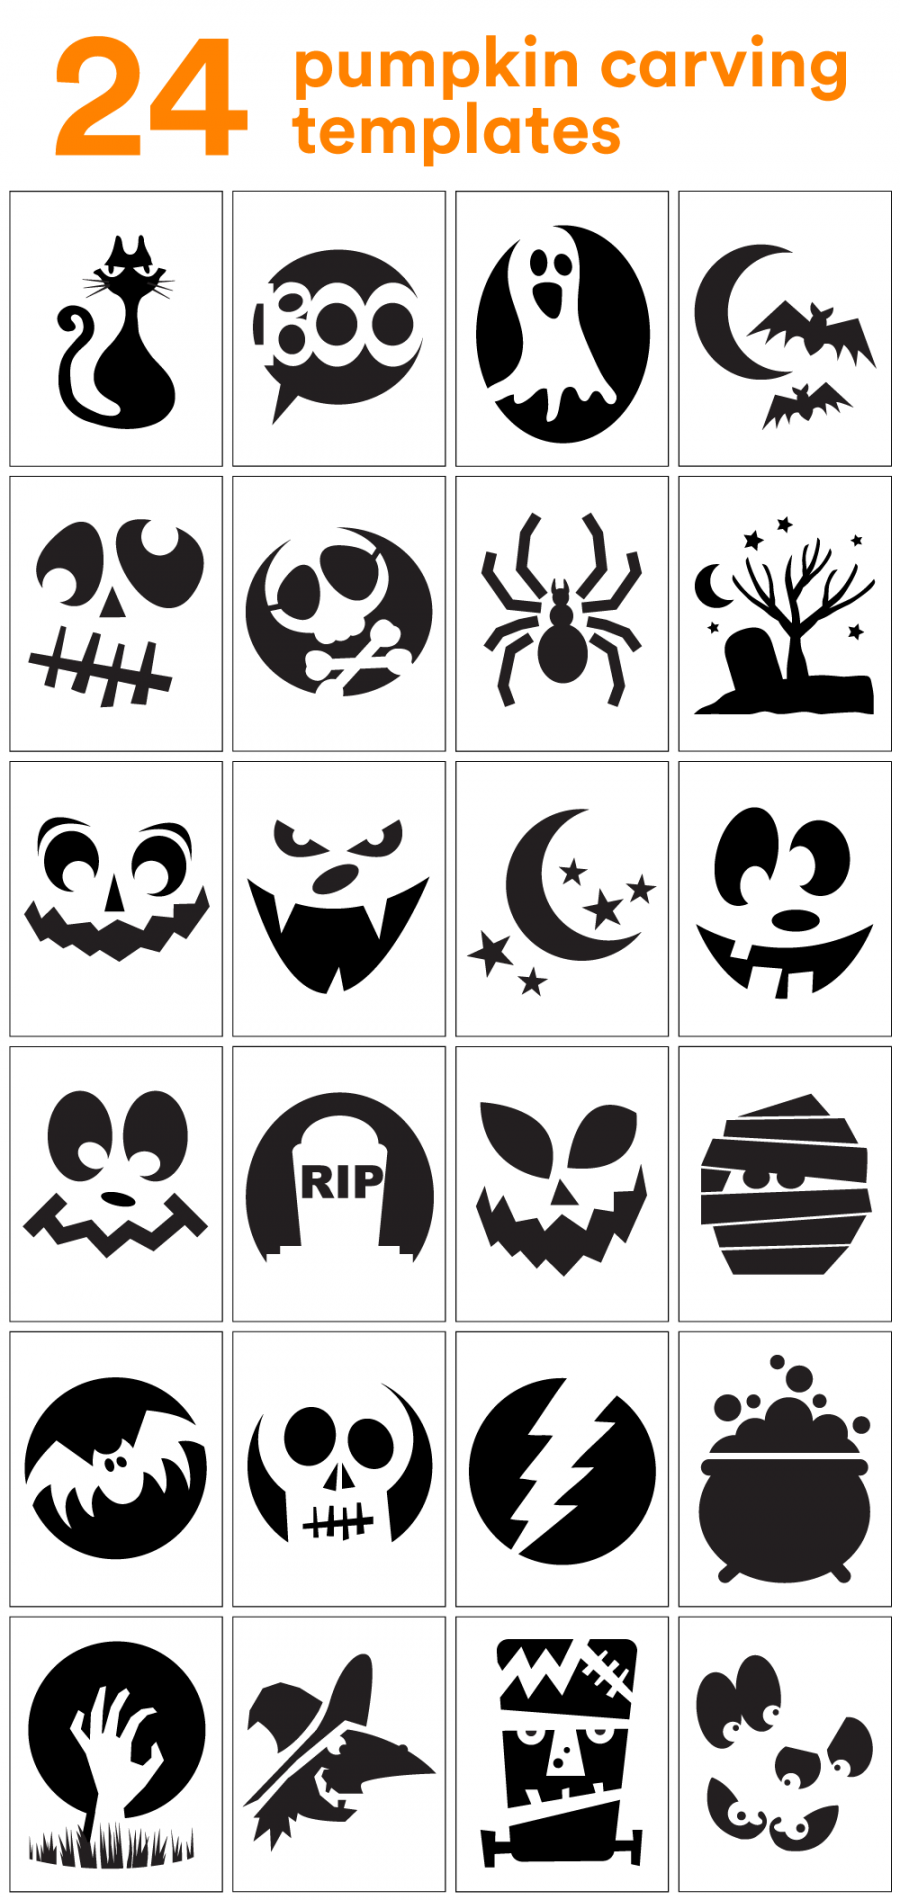 Free Printable Pumpkin Templates - Printable - How to Carve the Coolest Pumpkin on the Block (Carving Stencils